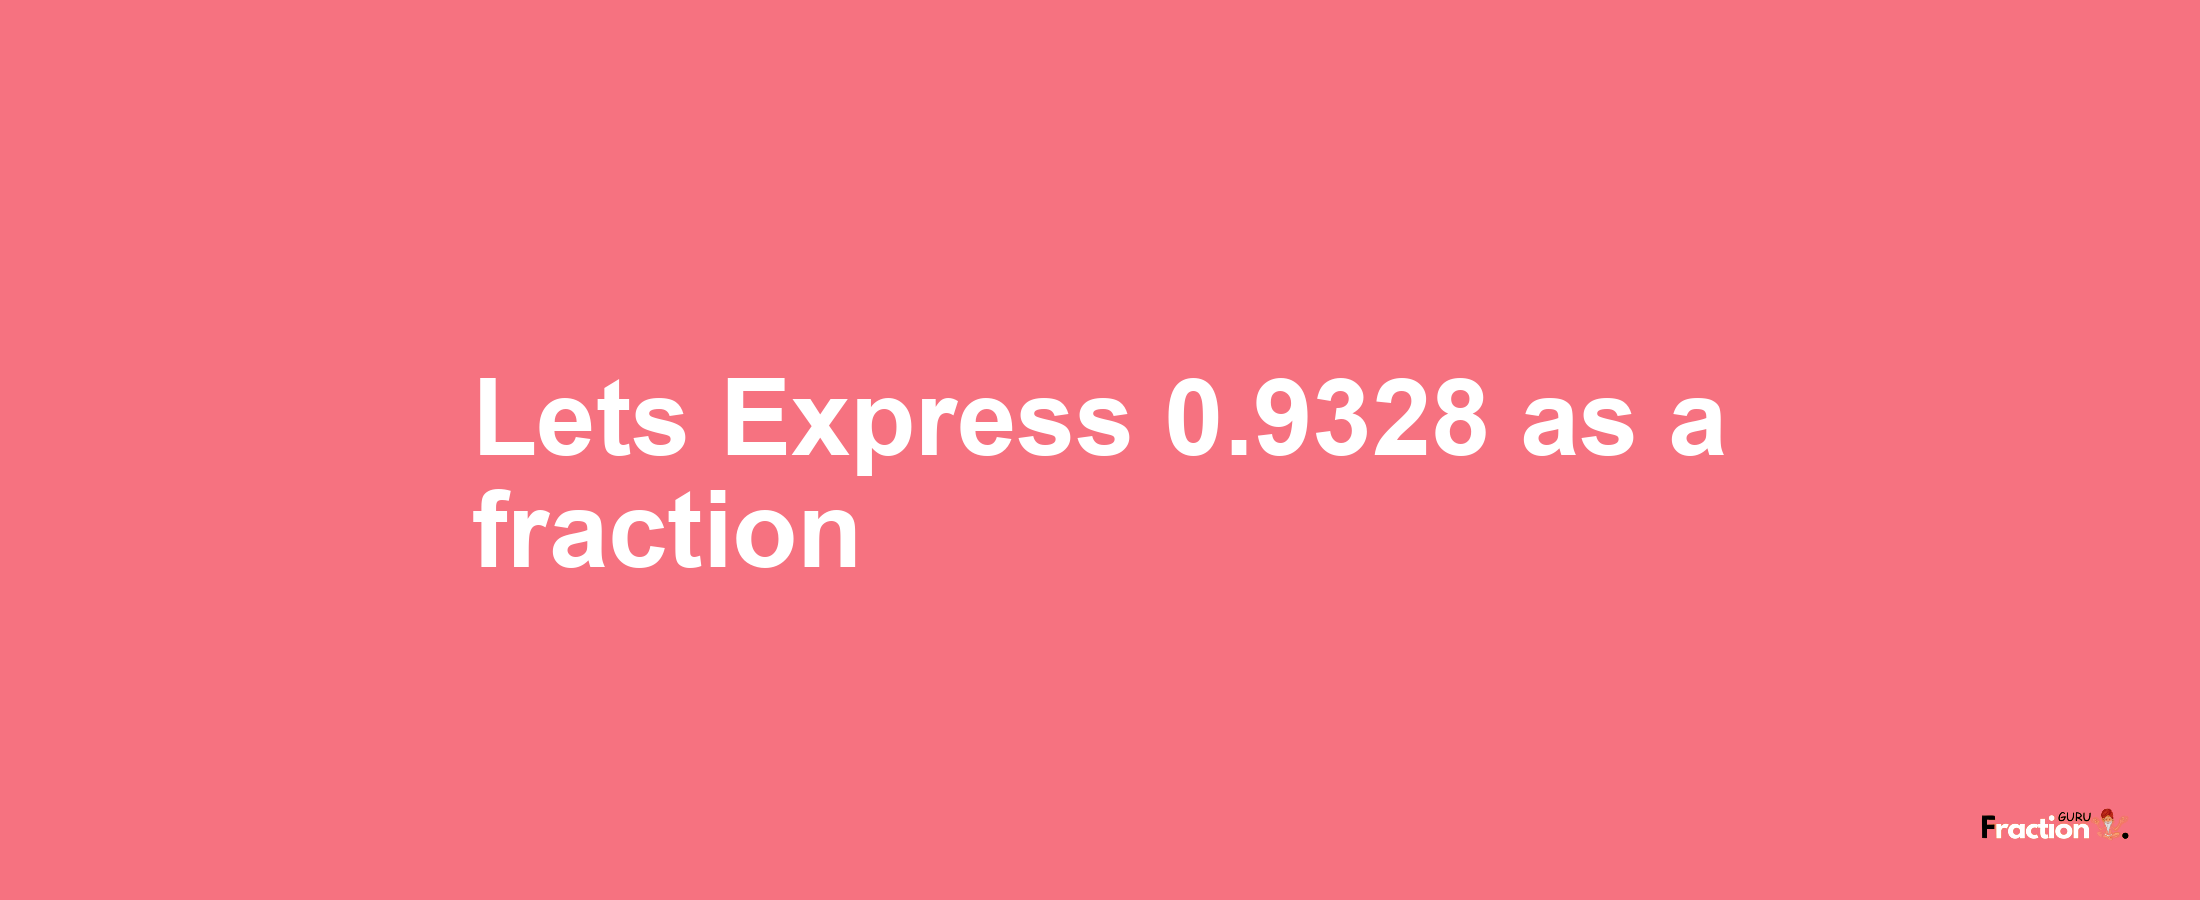 Lets Express 0.9328 as afraction